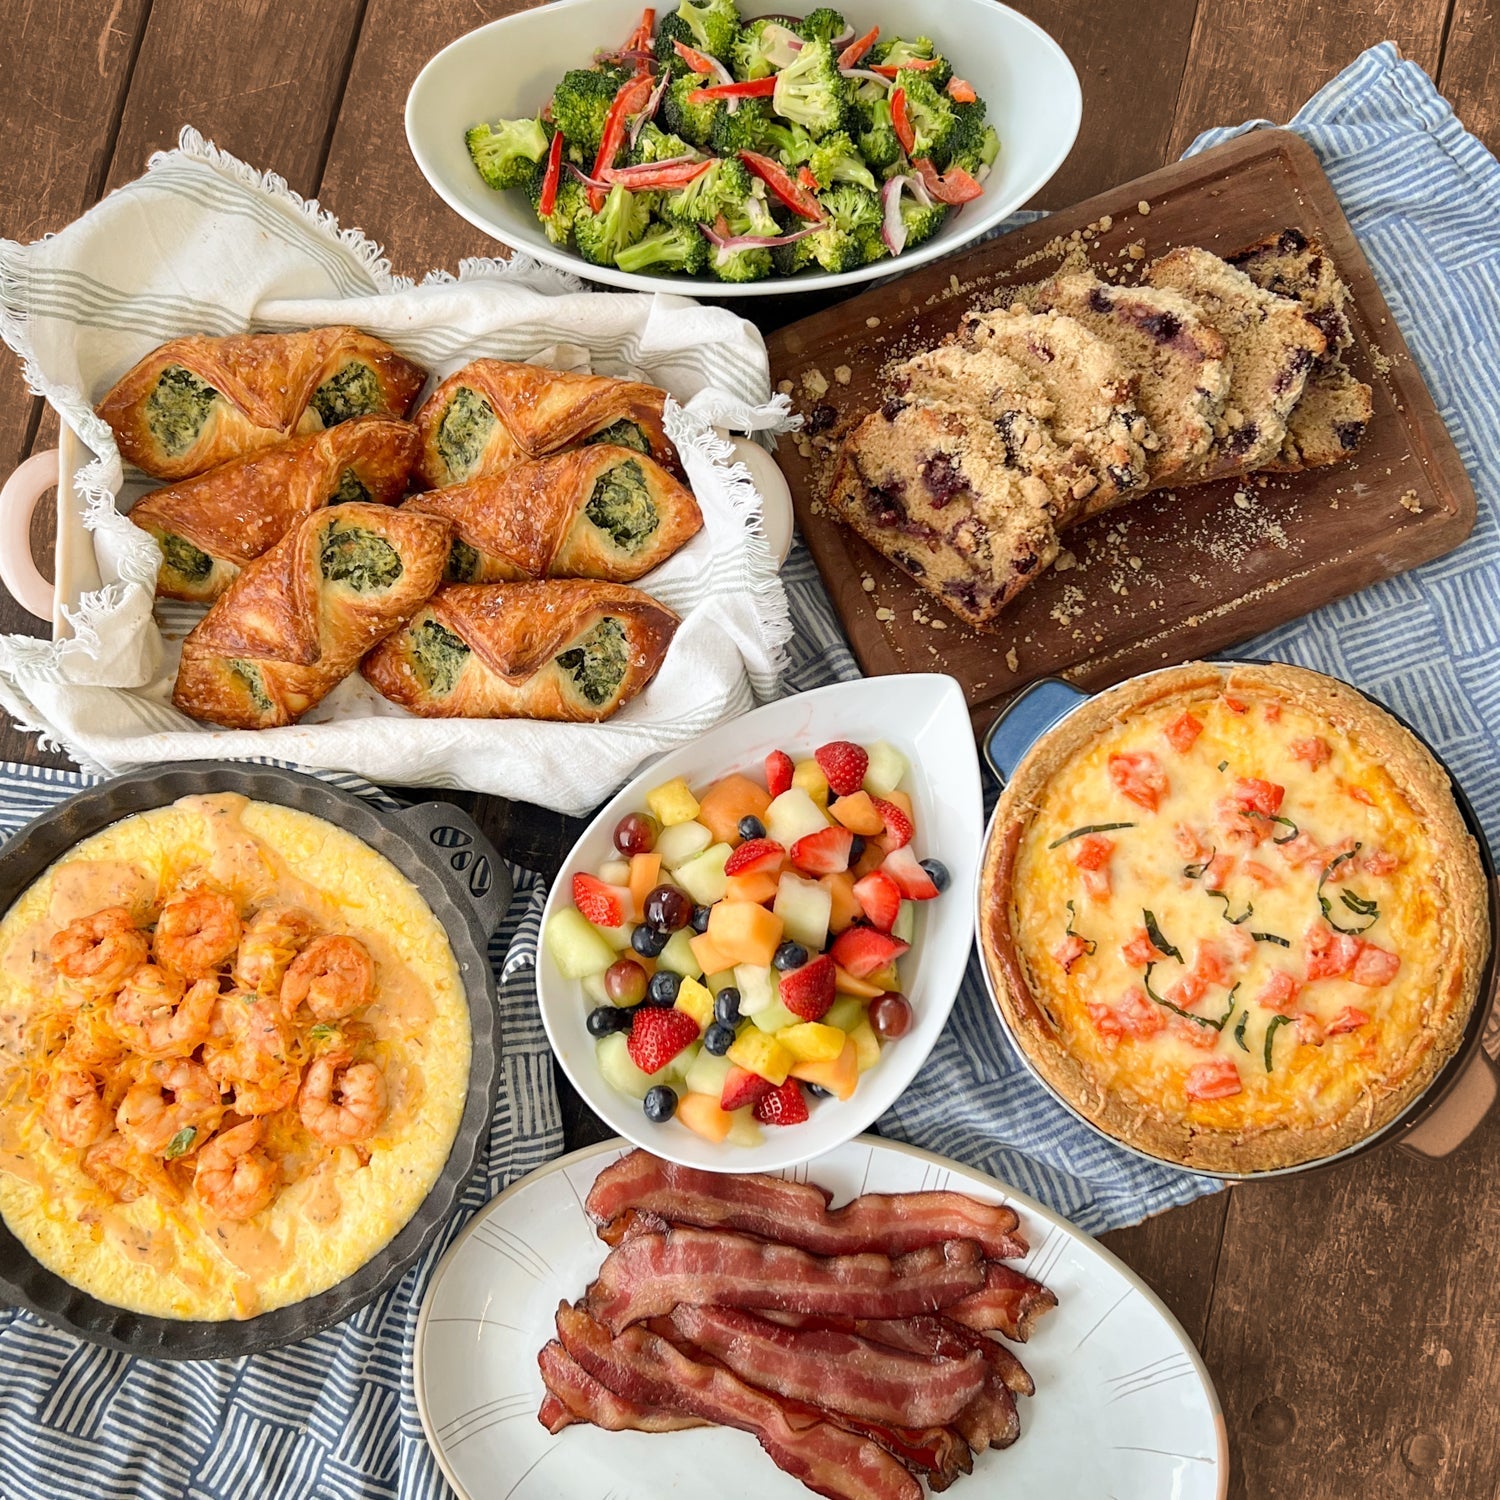 Mothers Day prepared meal kit: shrimp and grits, quiche, bacon, salad, pastries 